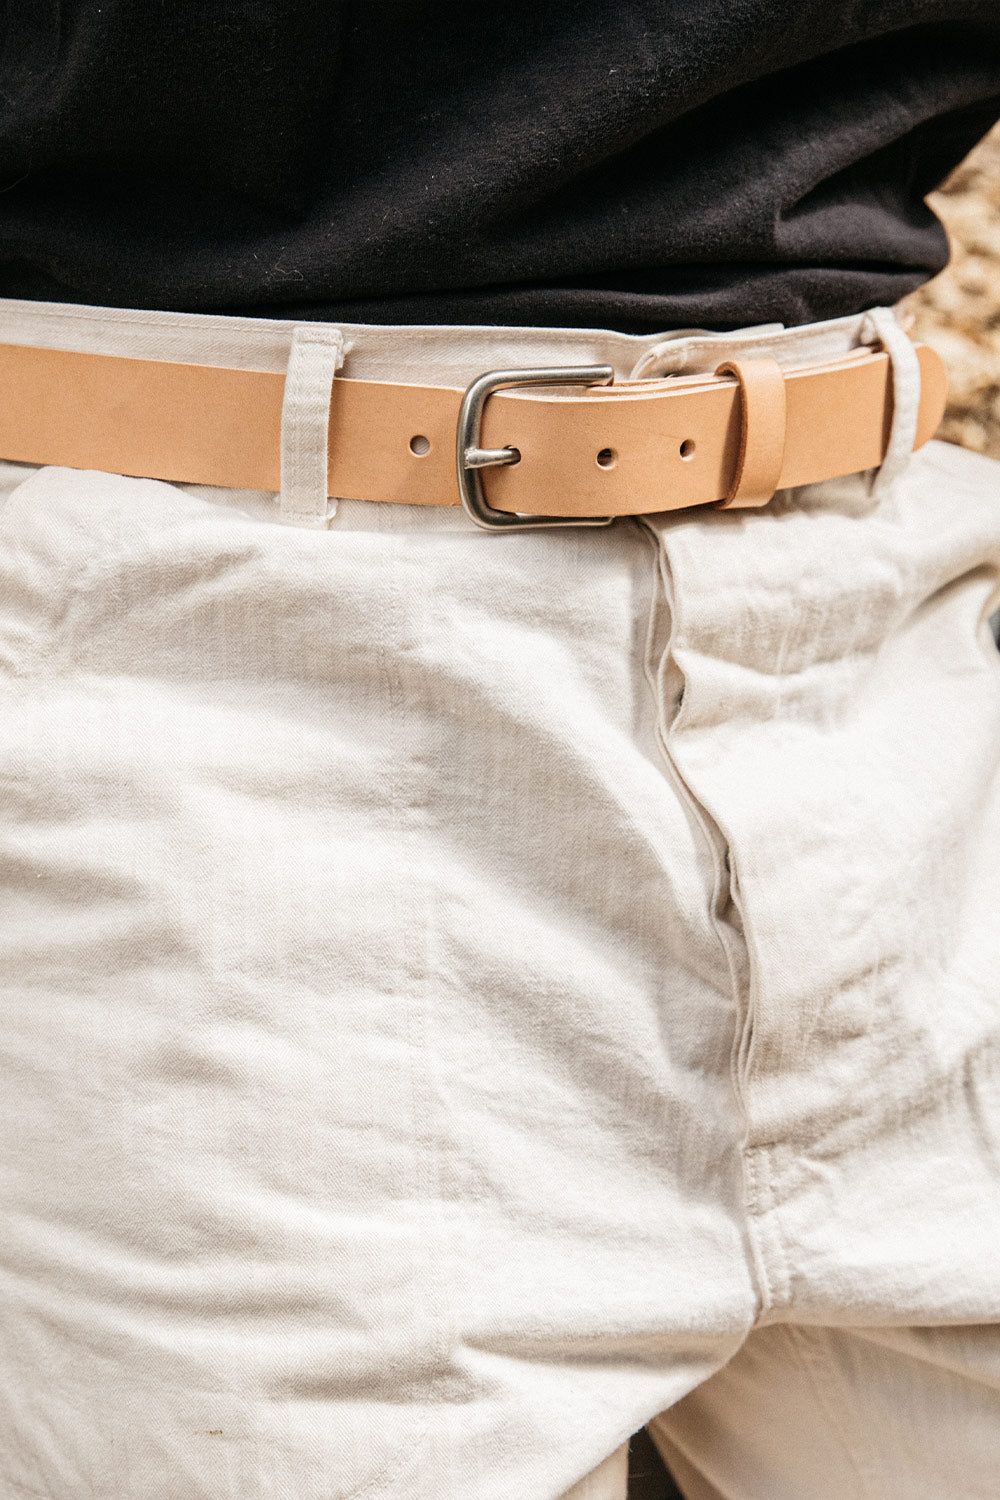 Classic Leather Belt - Natural